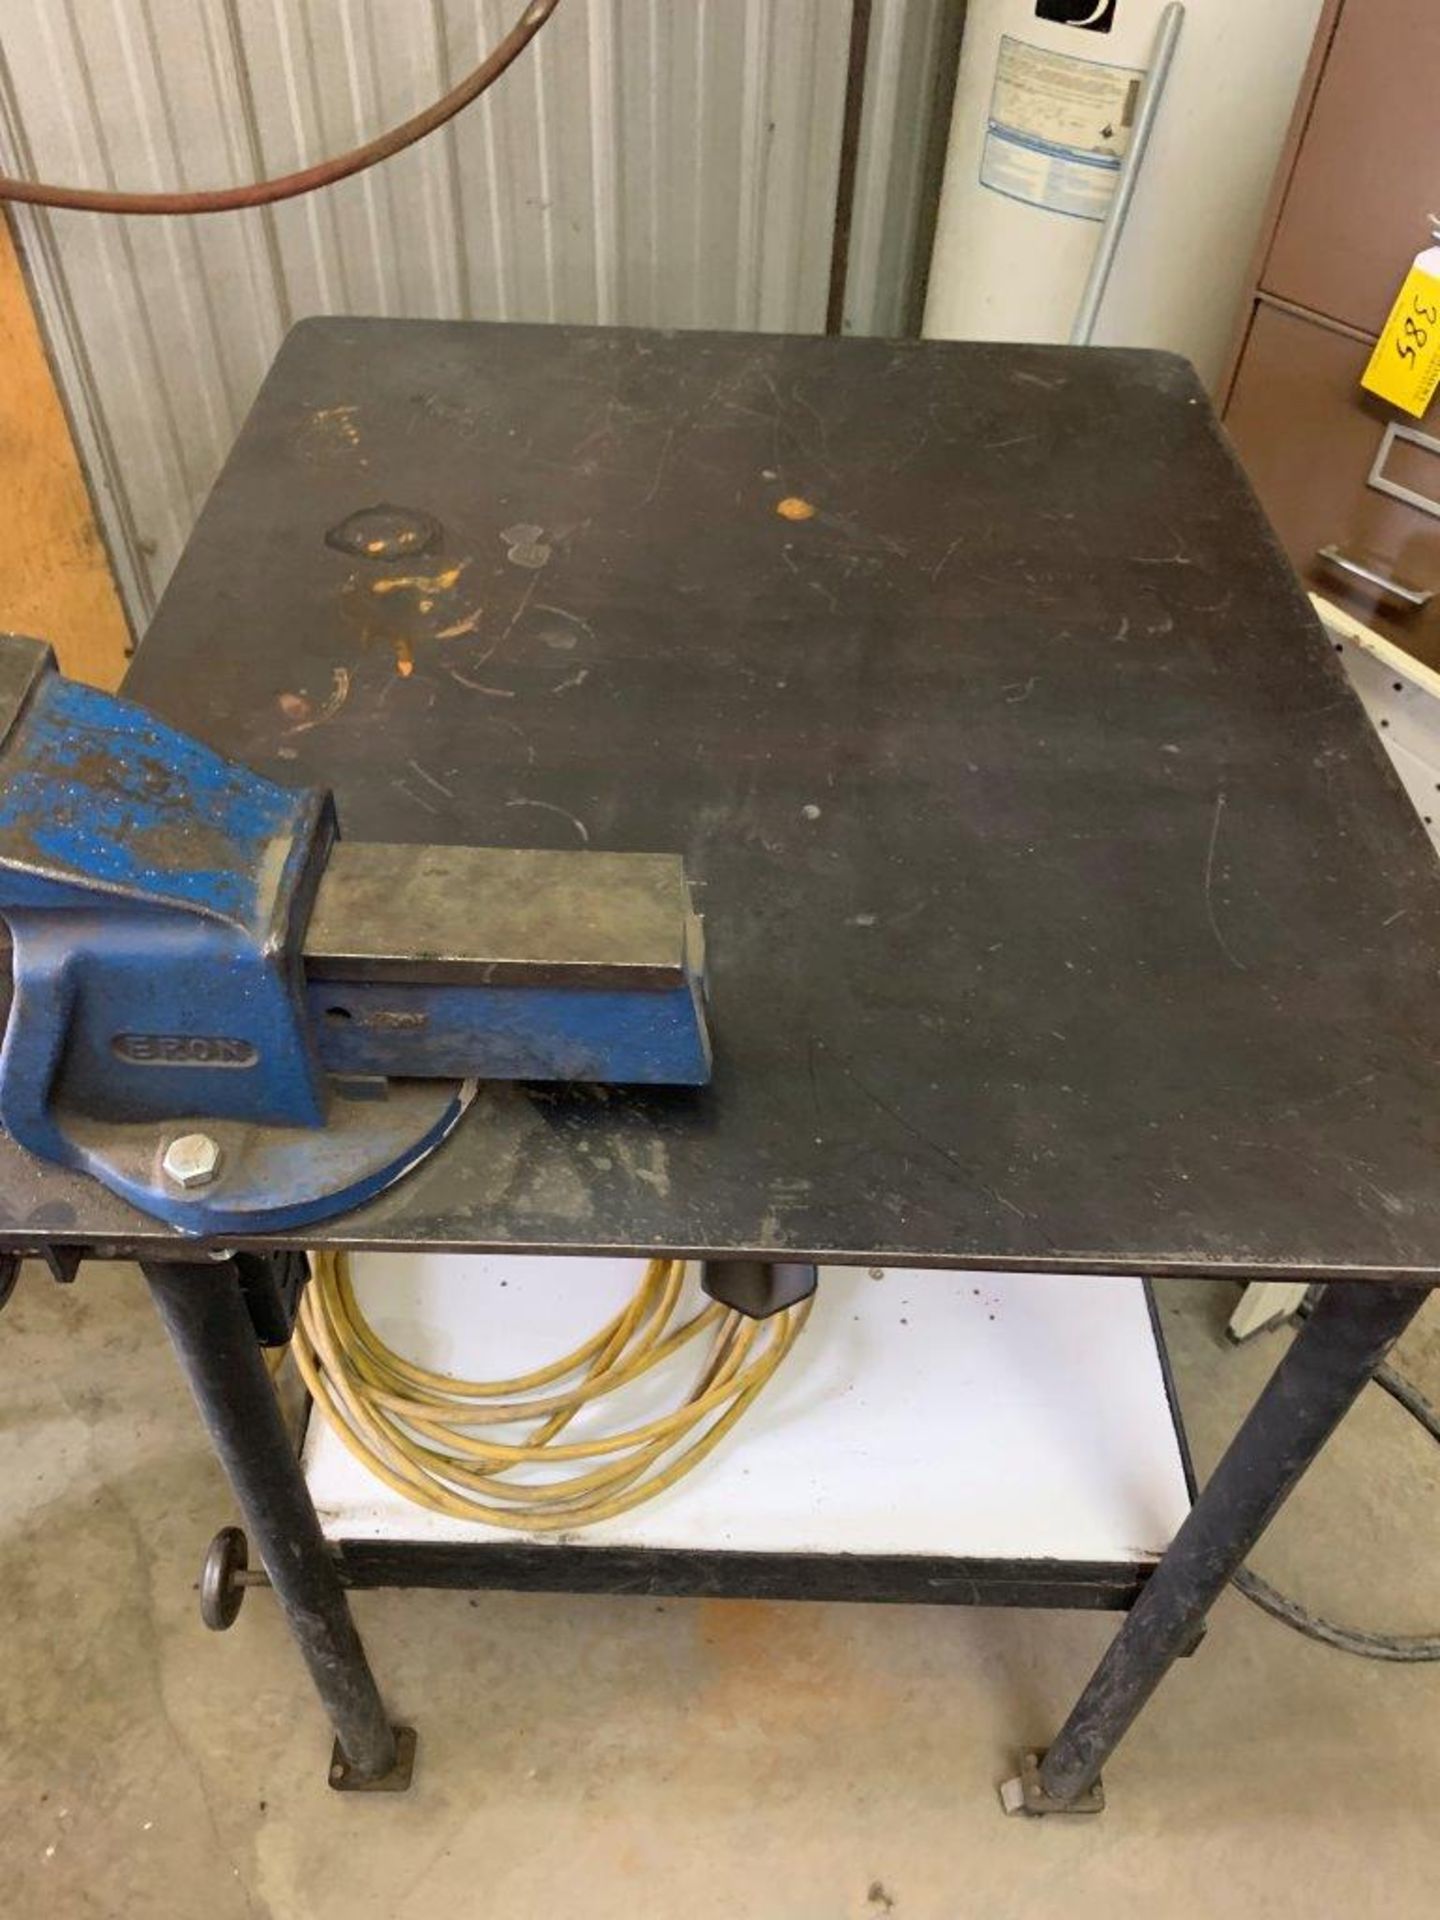 STEEL WELDING TABLE 30"X36"X38"H W/ 5" ERON BENCH VISE, INTEGRAL POWER CORD AND OUTLETS - Image 2 of 3